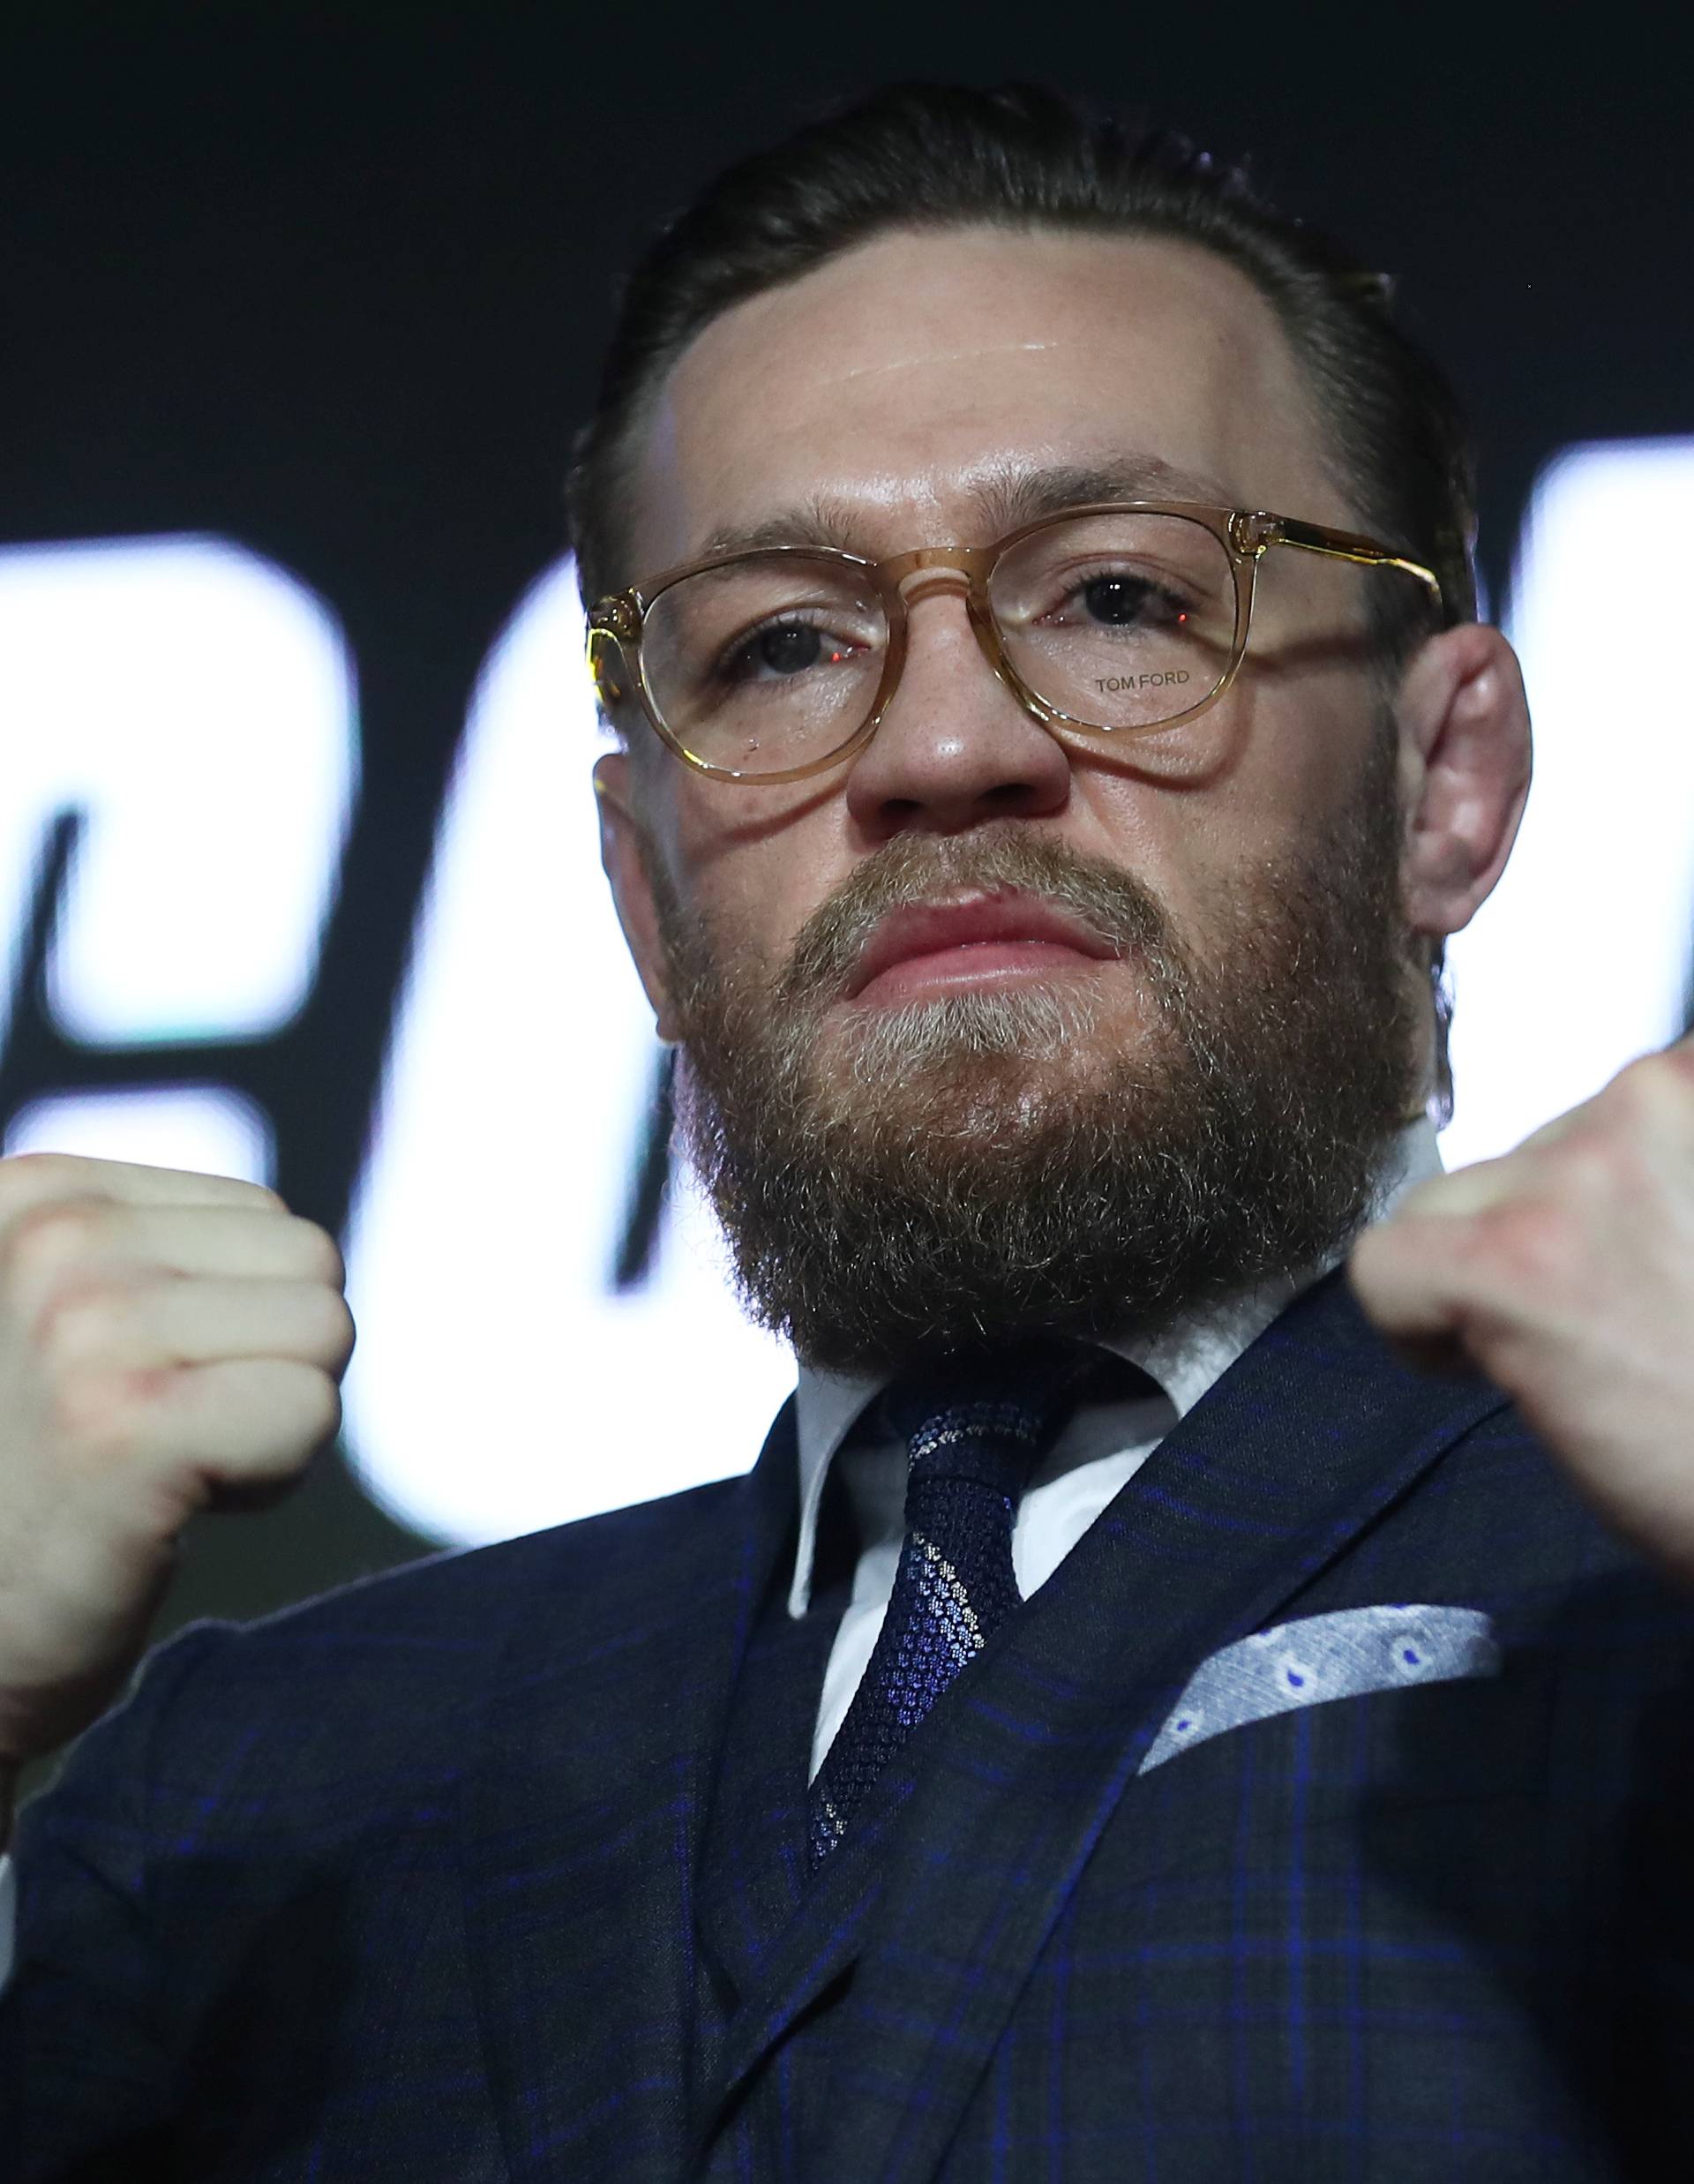 Mixed martial arts (MMA) fighter Conor McGregor attends a news conference in Moscow